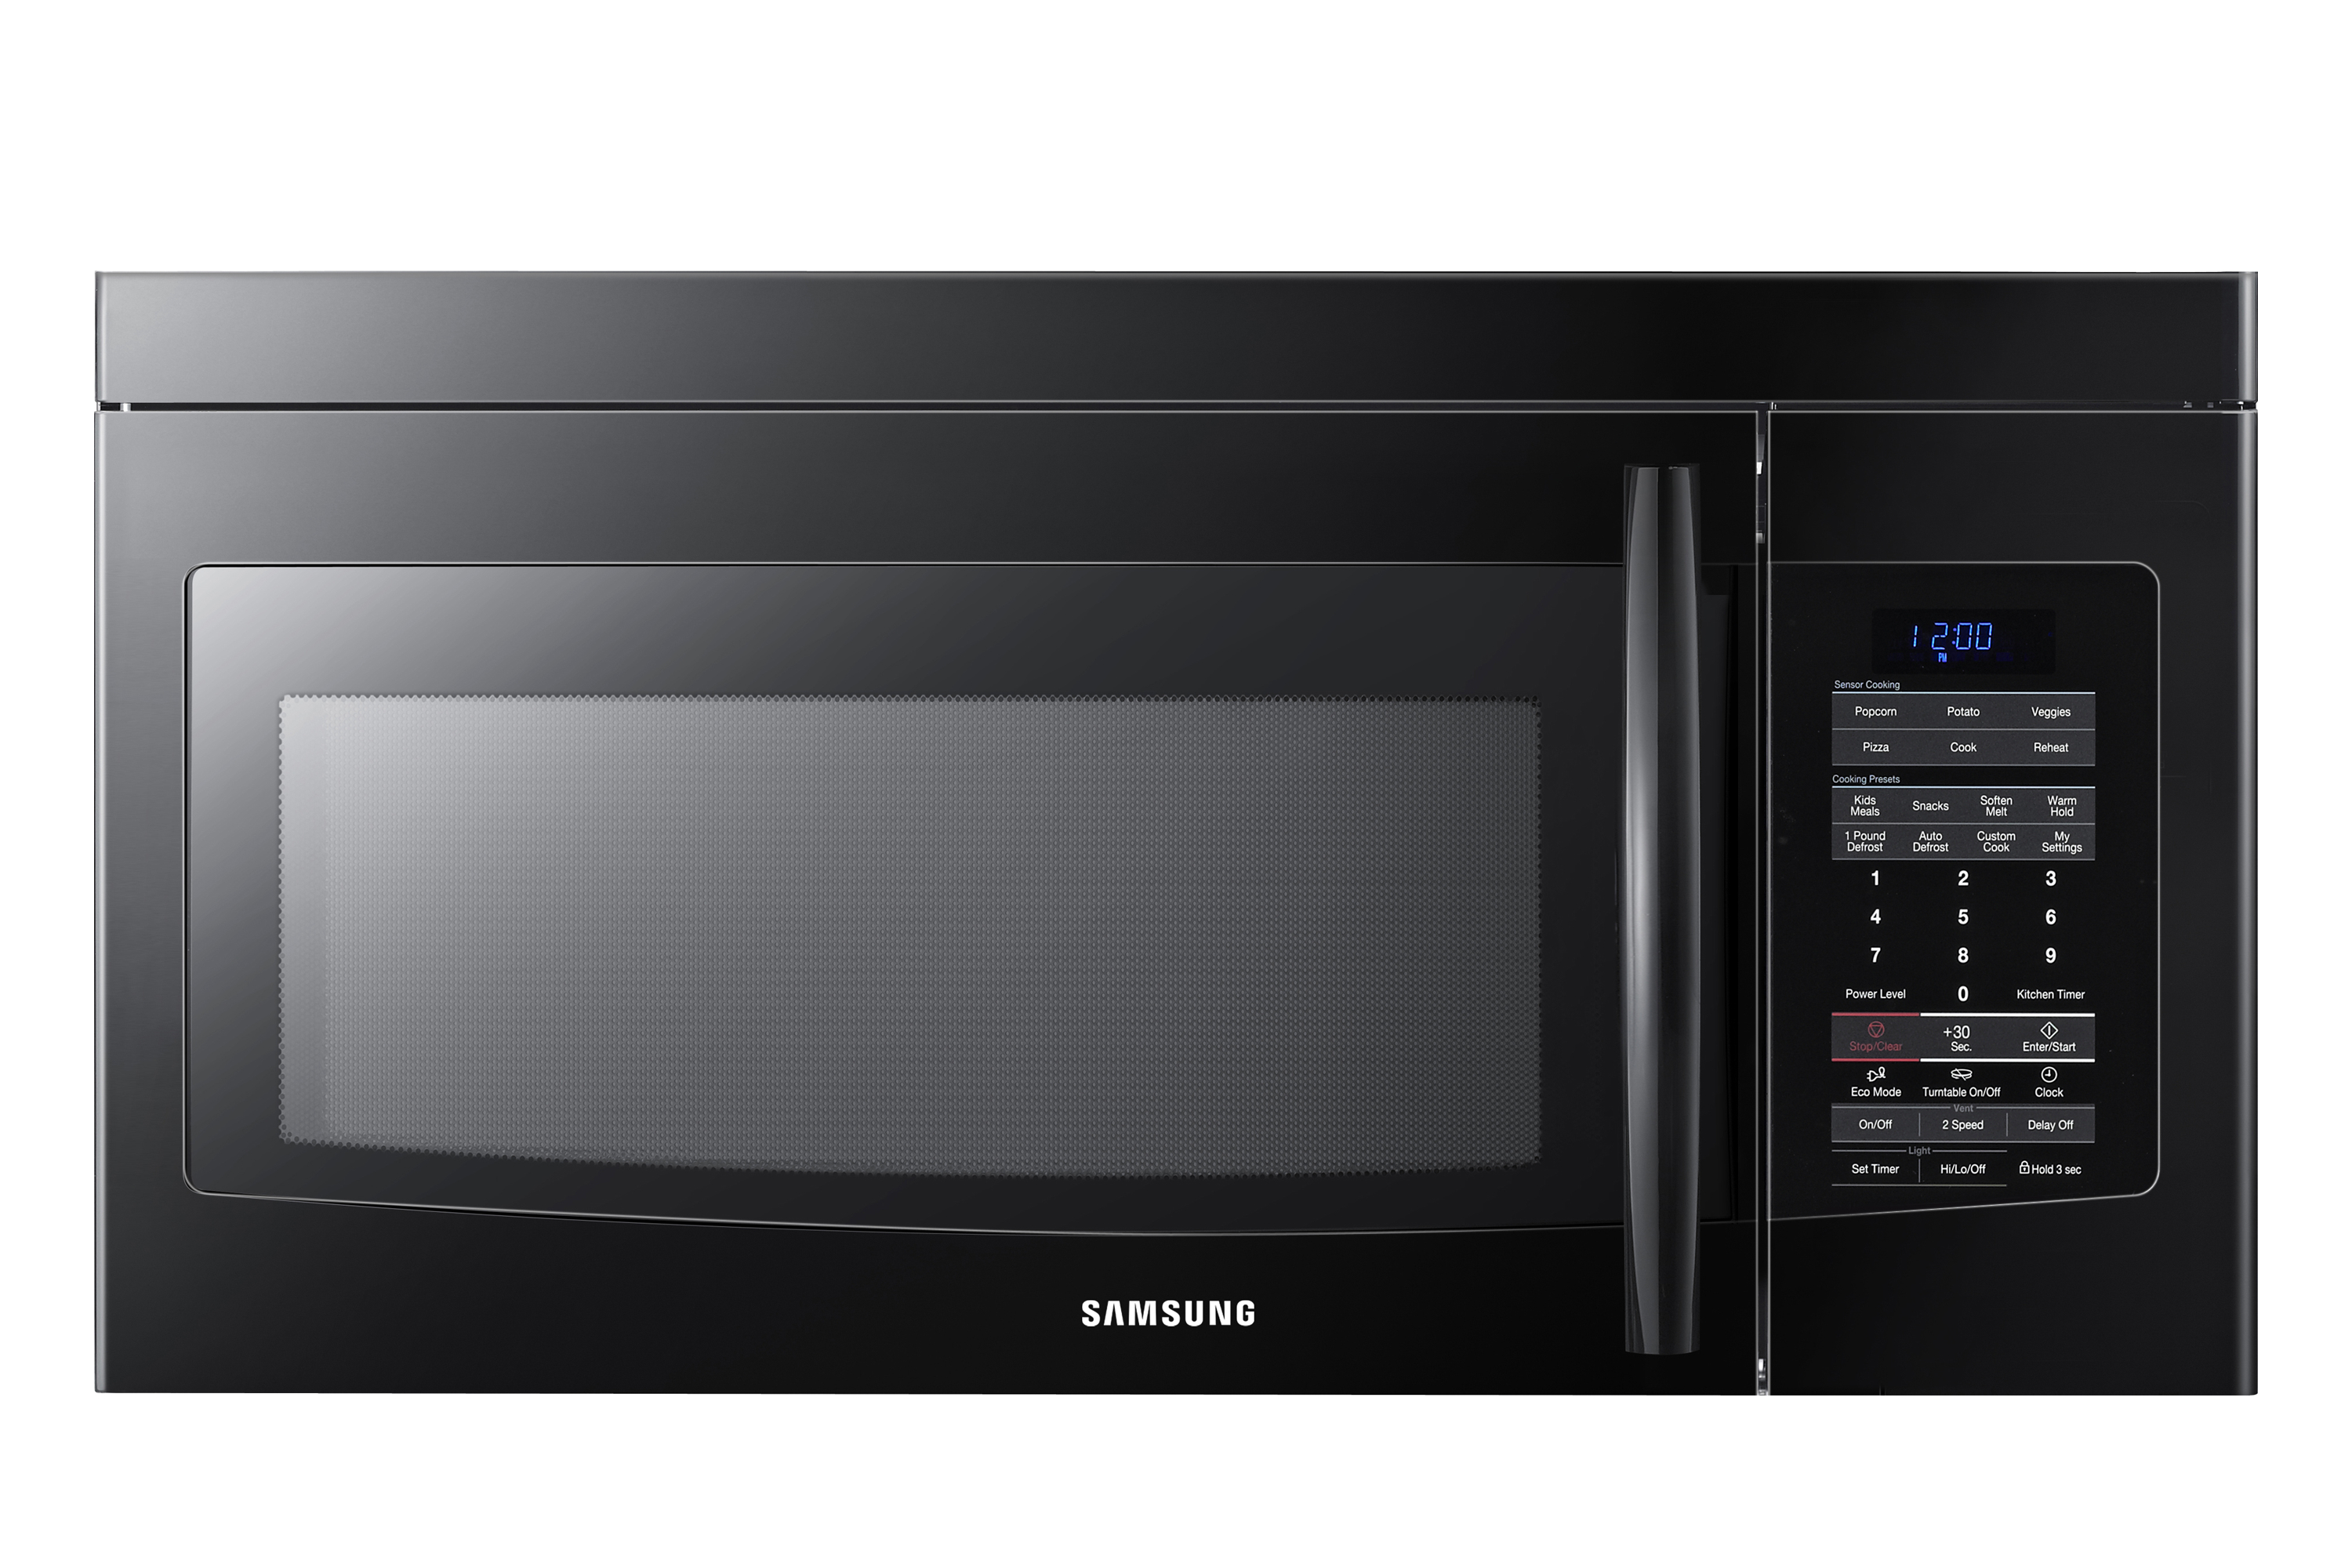 Samsung SMH1713B 1.7 cu. ft. OvertheRange Microwave Oven with 300 CFM Venting System, 2Stage